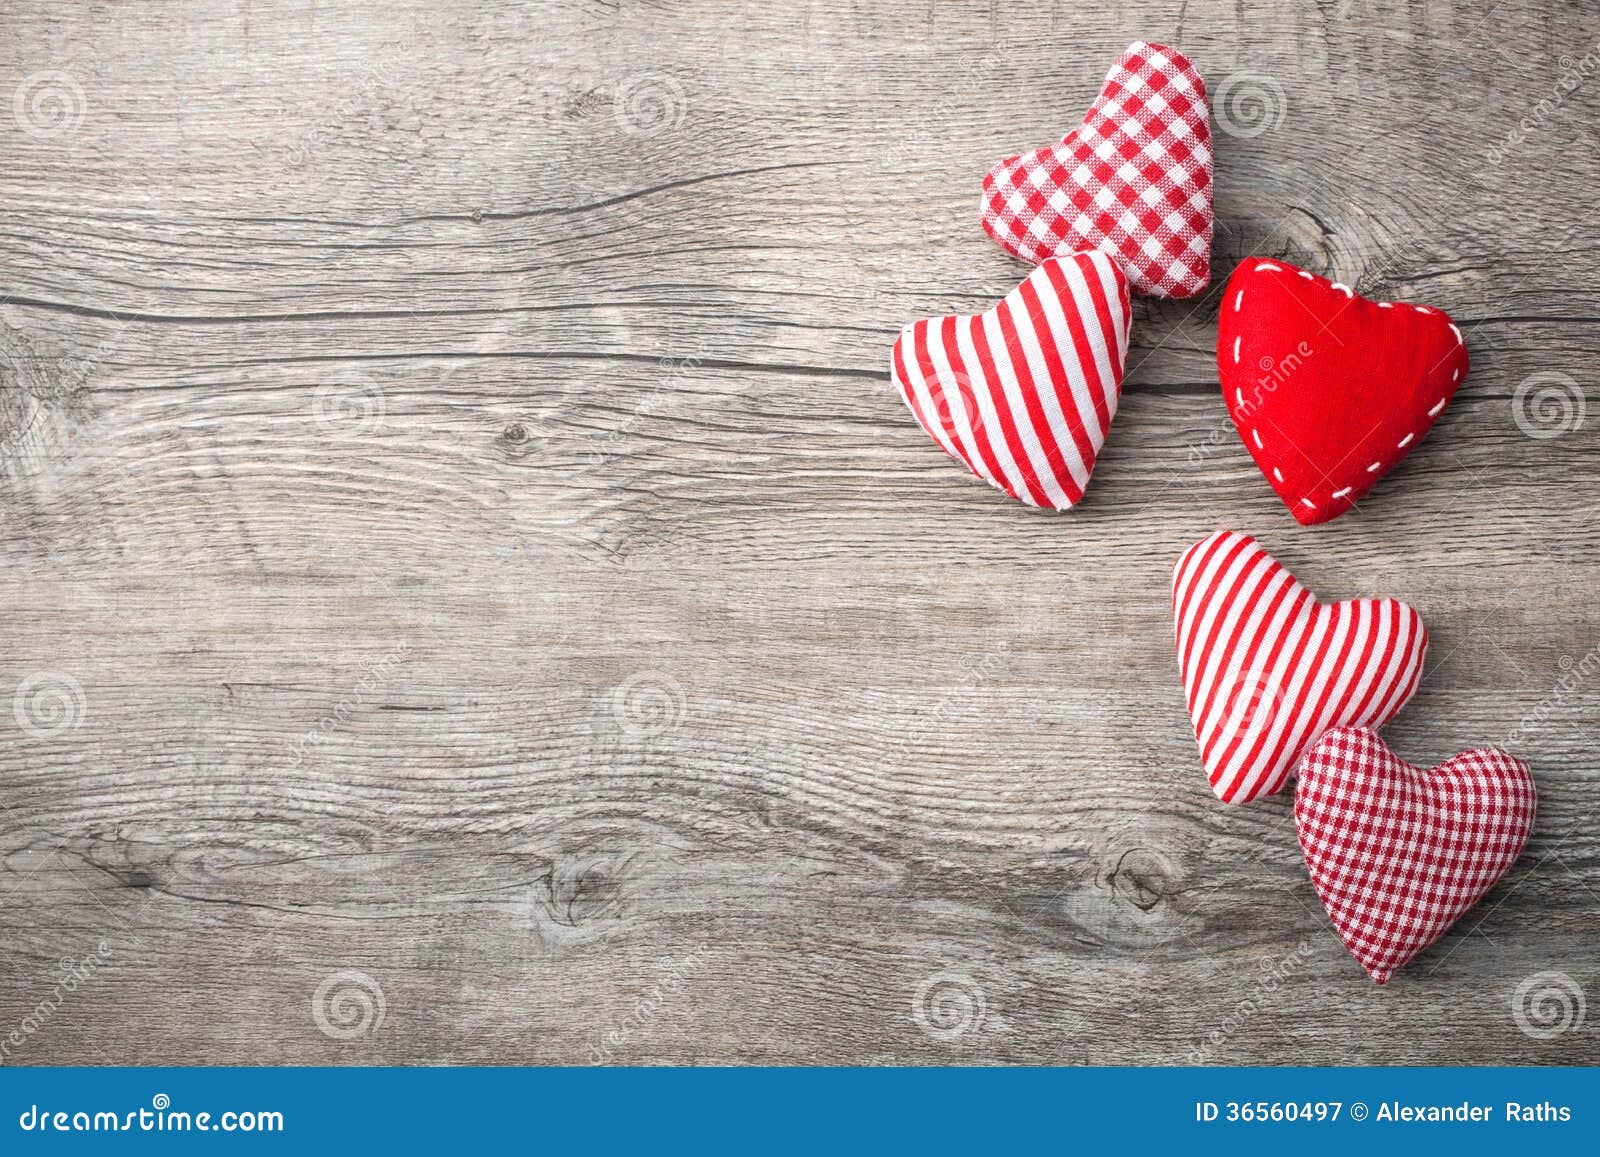 Valentines Day background stock image. Image of copy - 36560497